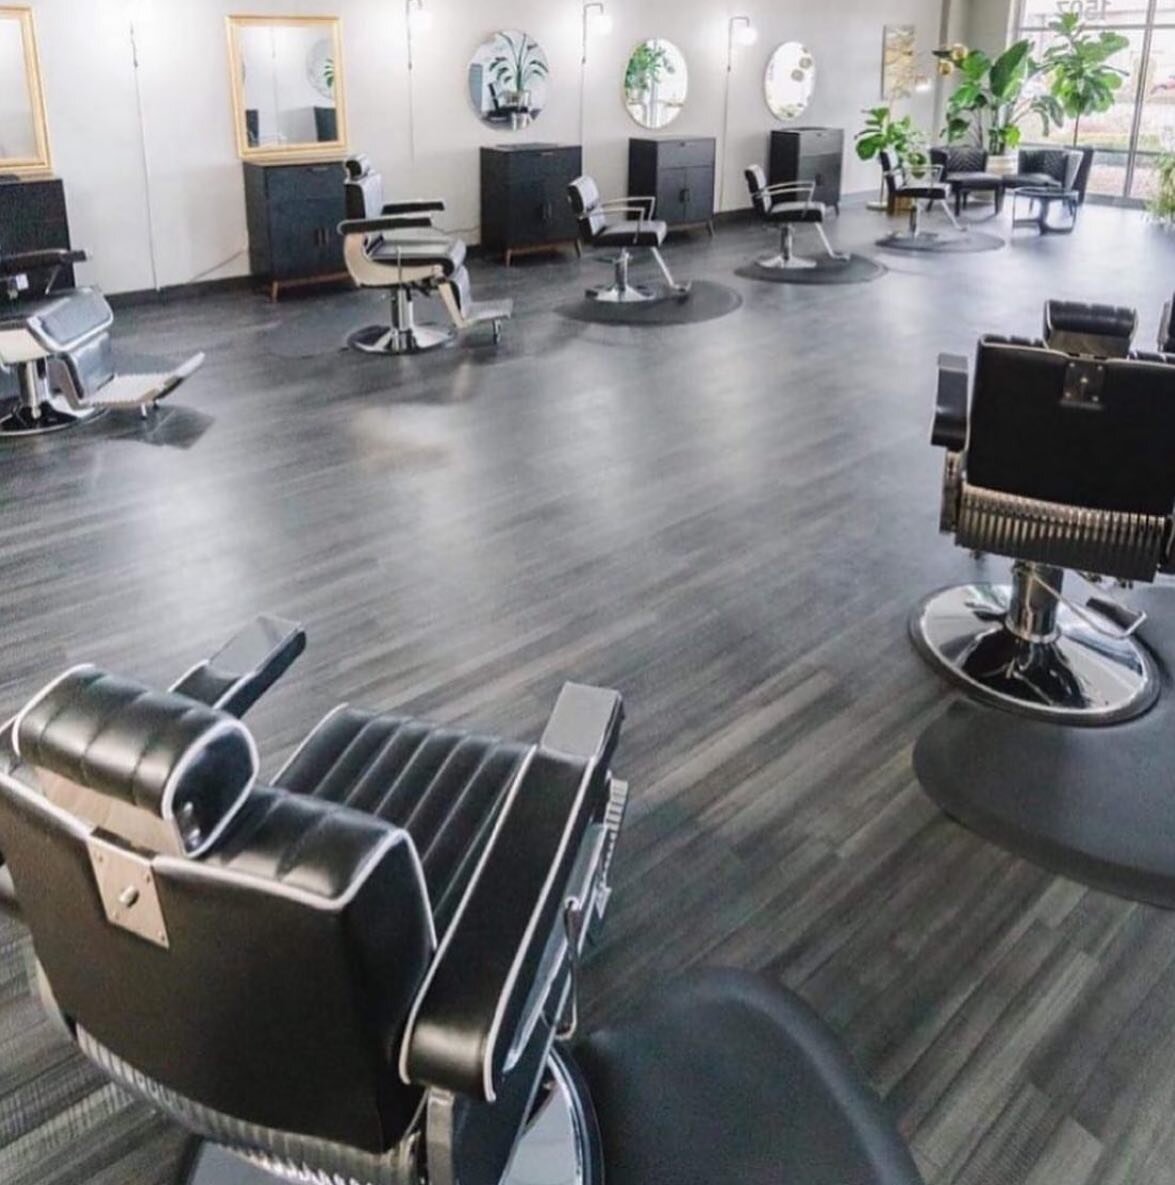 We are looking for a Stylist to start at Stature Salon &amp; Barber Shop 

-Access to the building for your own hours of operation as an Independent Contractor 
-Free parking for you and your guests in downtown boise
-Marketing, social media promotio